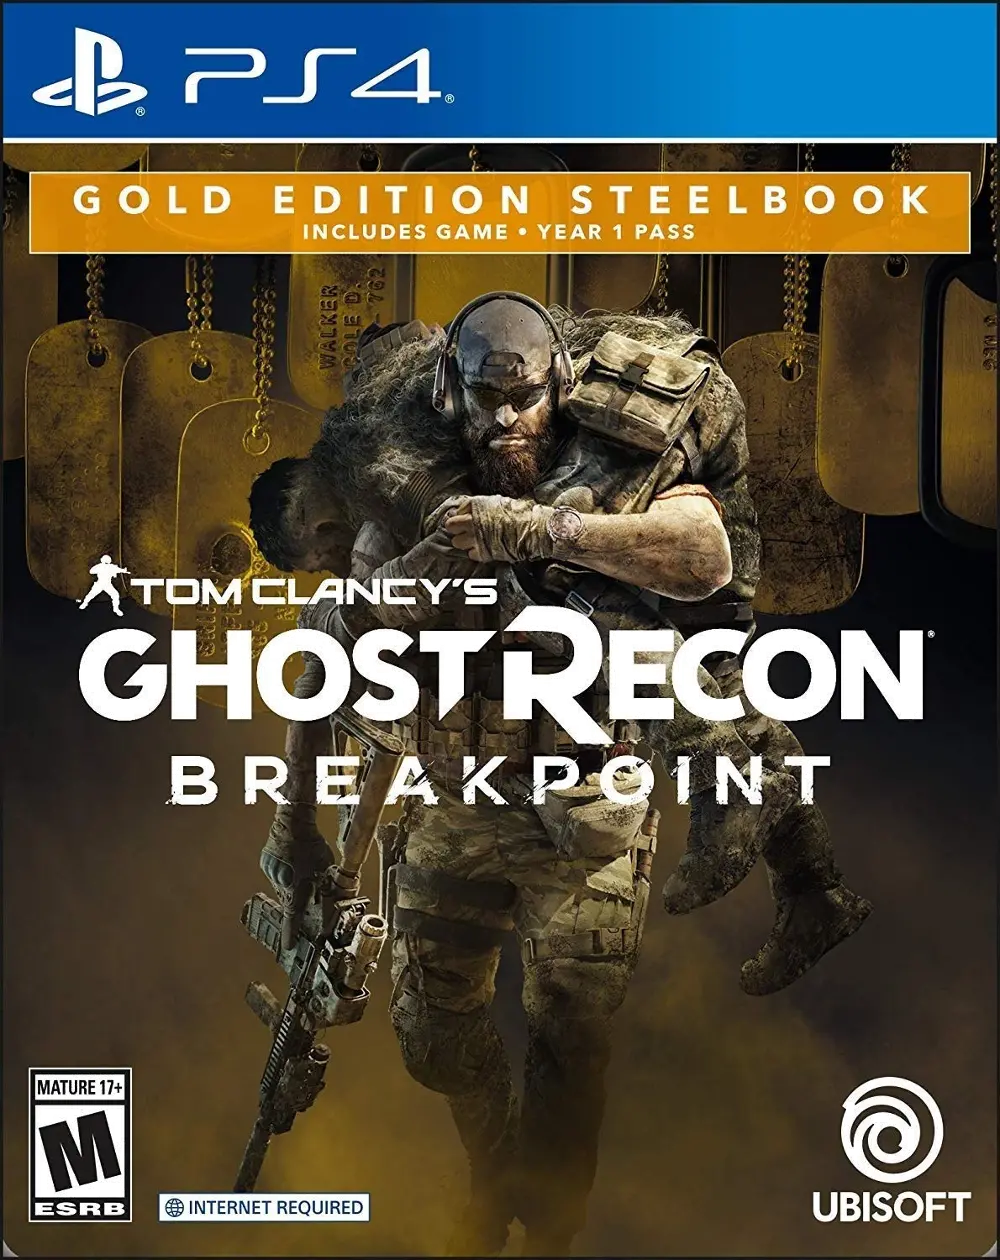 PS4 UBI 09045 Tom Clancy's Ghost Recon Breakpoint: Gold Edition - PS4-1